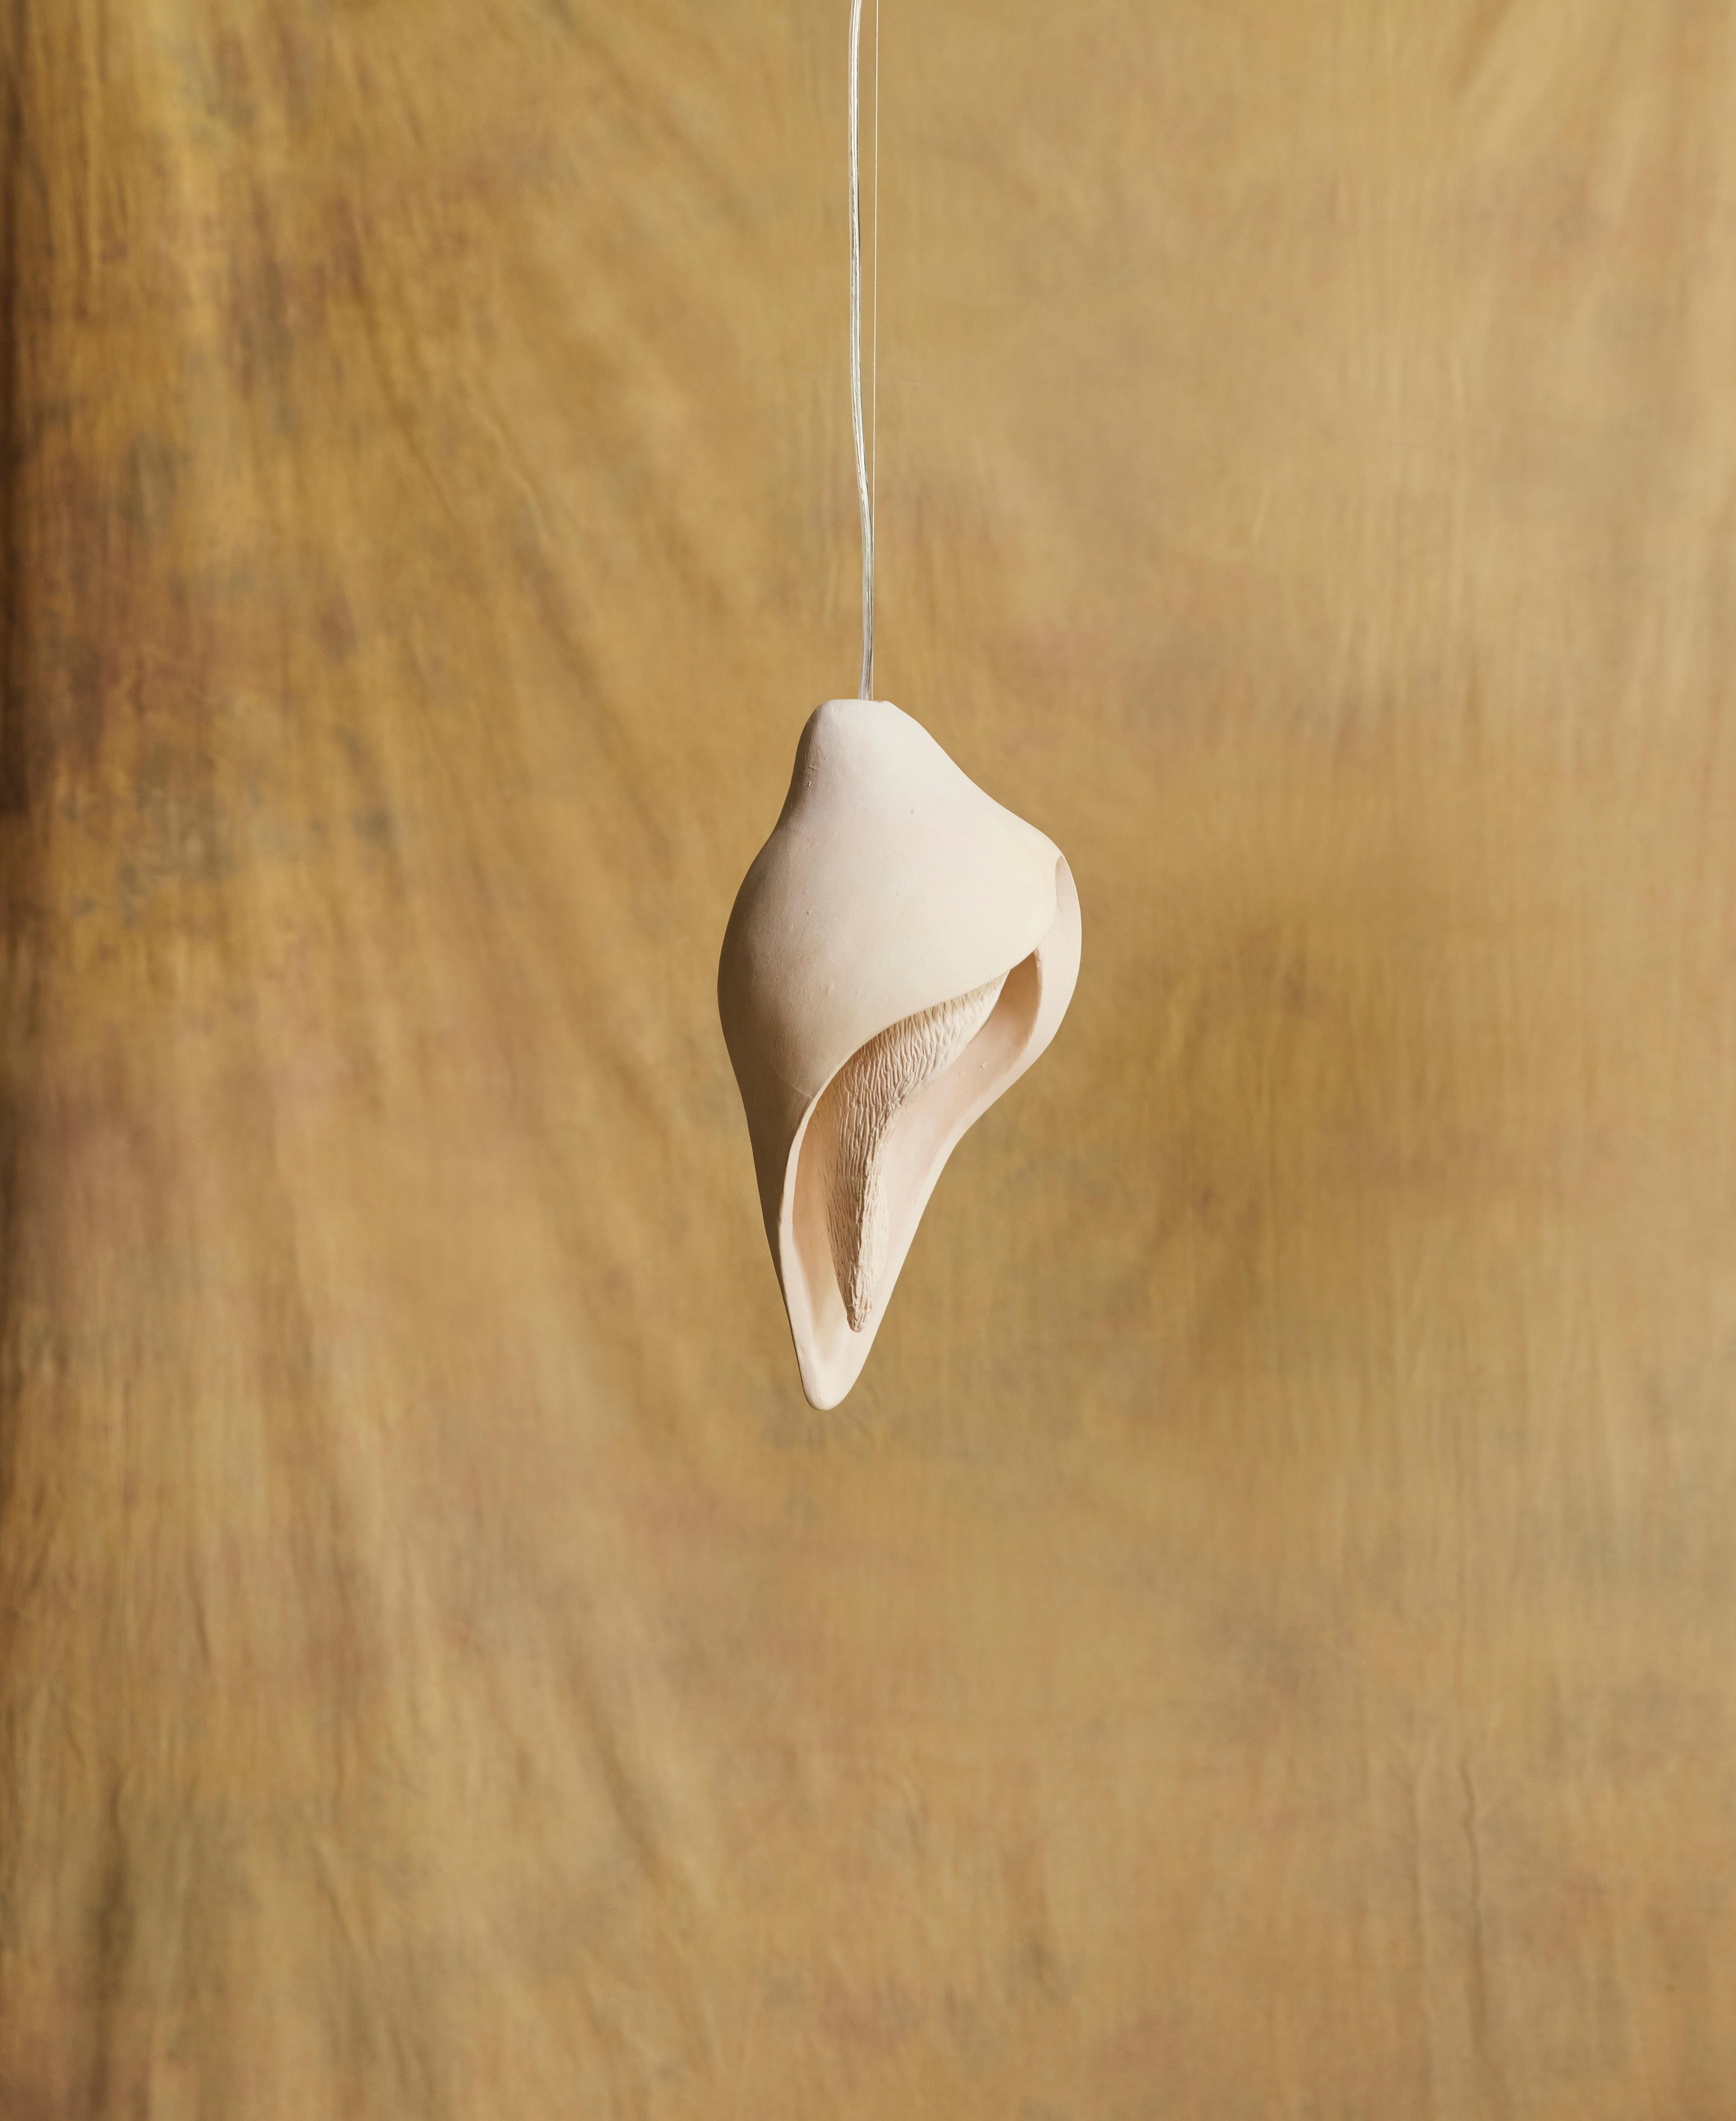 South African Small Womb Pendant Lamp by Jan Ernst